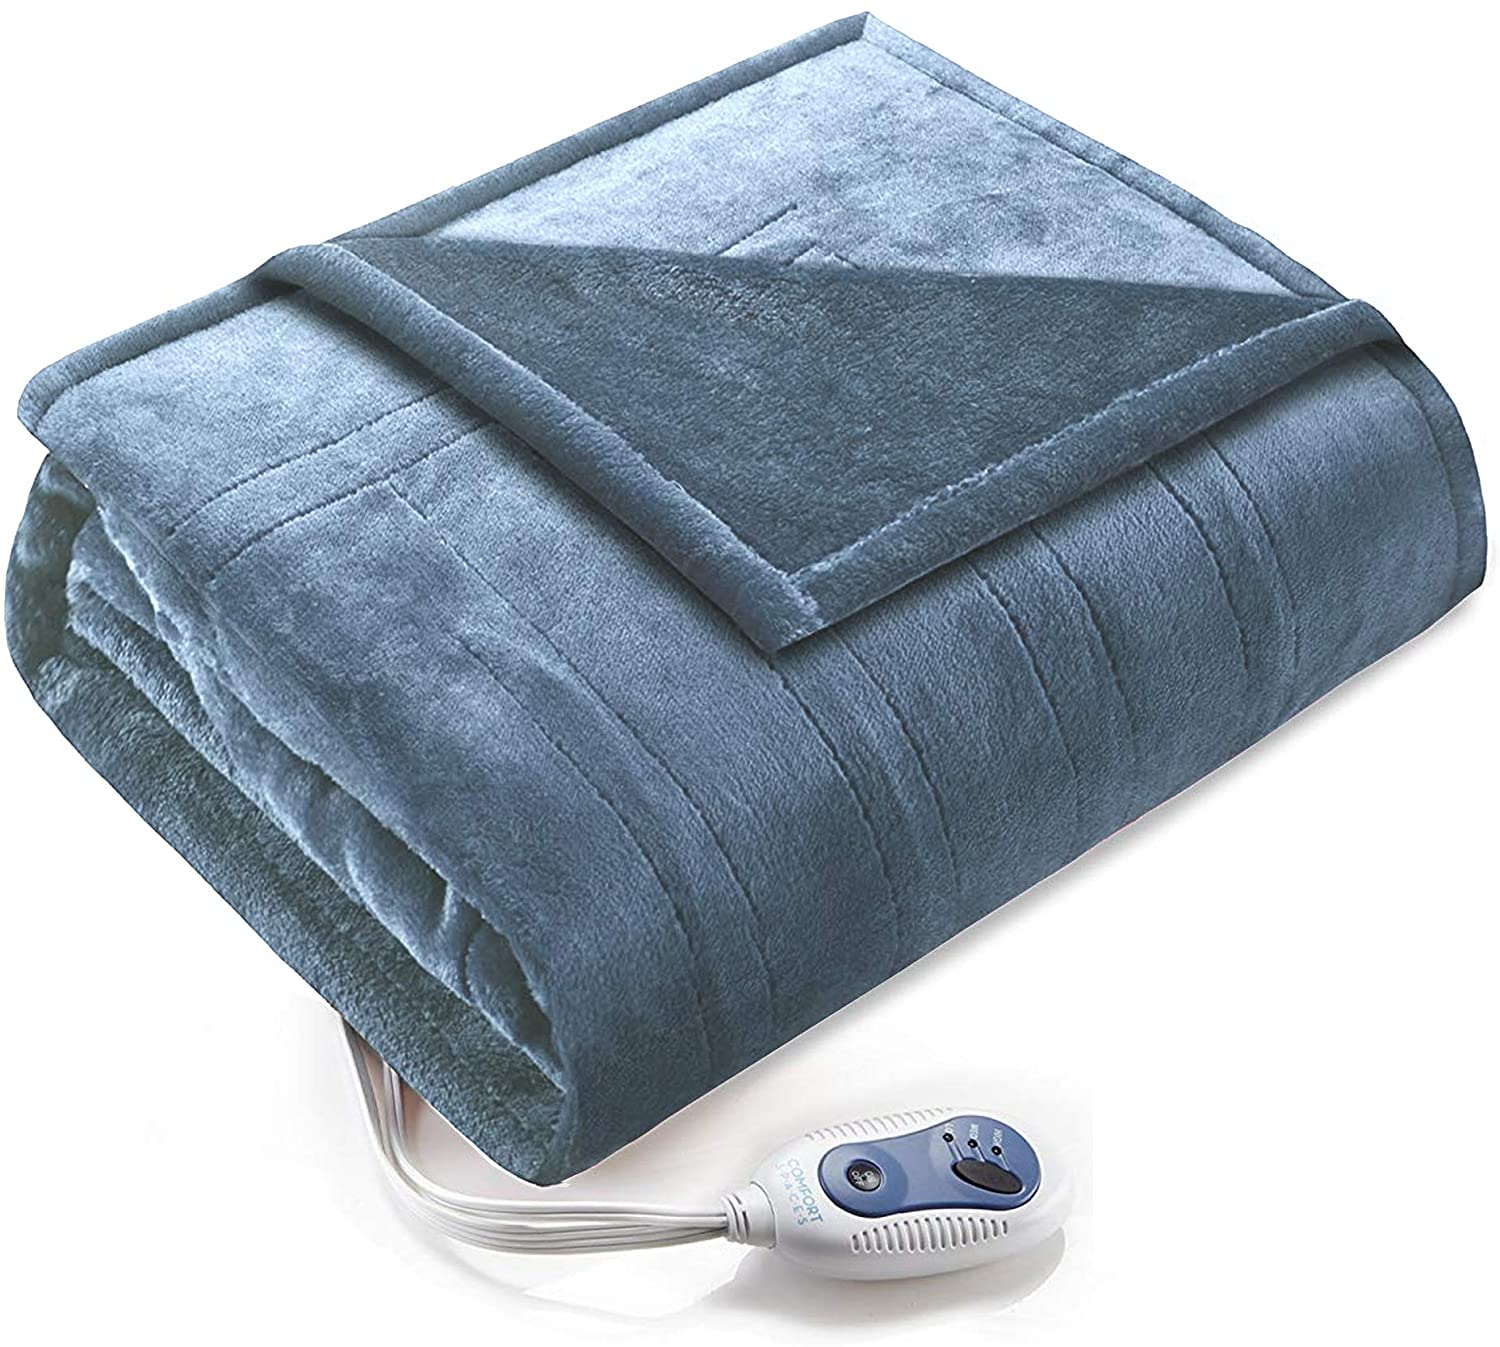 Top 10 Best Twin XL Electric Blankets Review & Buying Guide